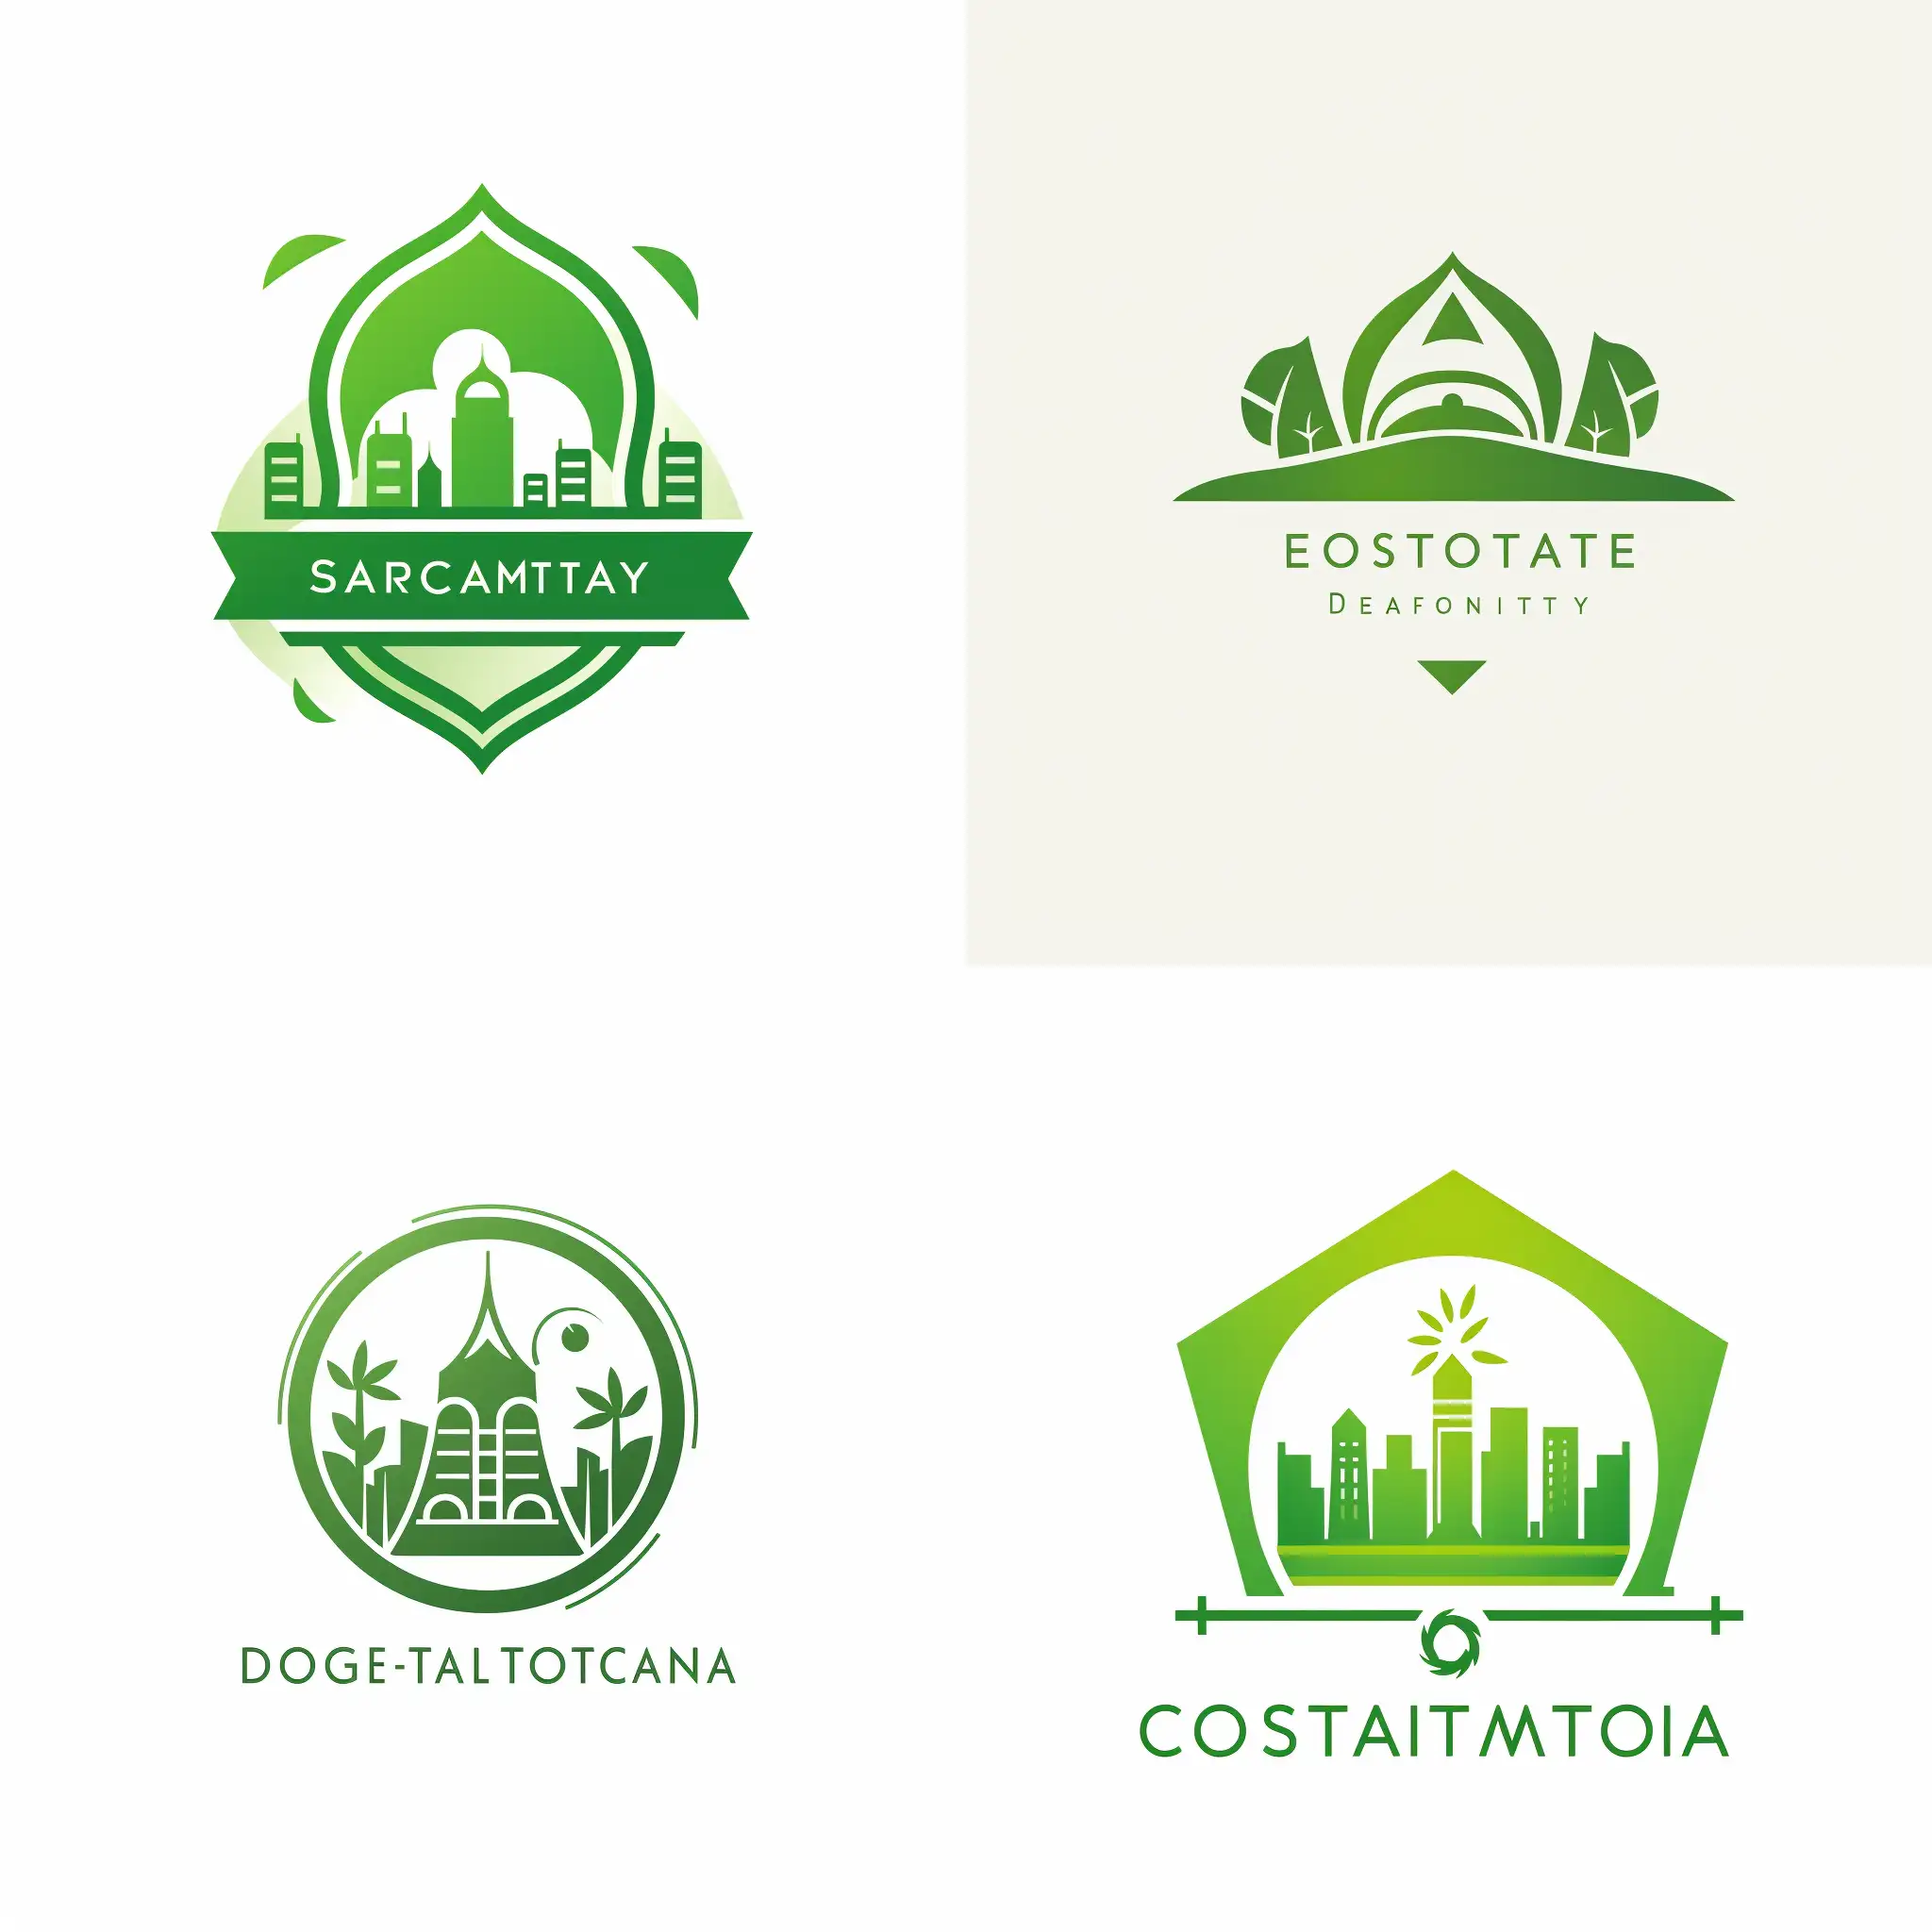 Design a logo as a symbol for a smart and green city, incorporating an octagonal star made of delta particles to represent modernity and advancement. Use the delta particles to scatter light, instead of traditional intersecting rays, to convey a sense of technological innovation. Integrate green and sustainable elements to reflect the smart and eco-friendly nature of the city, transforming the logo into a symbol of a vibrant and sustainable urban life.